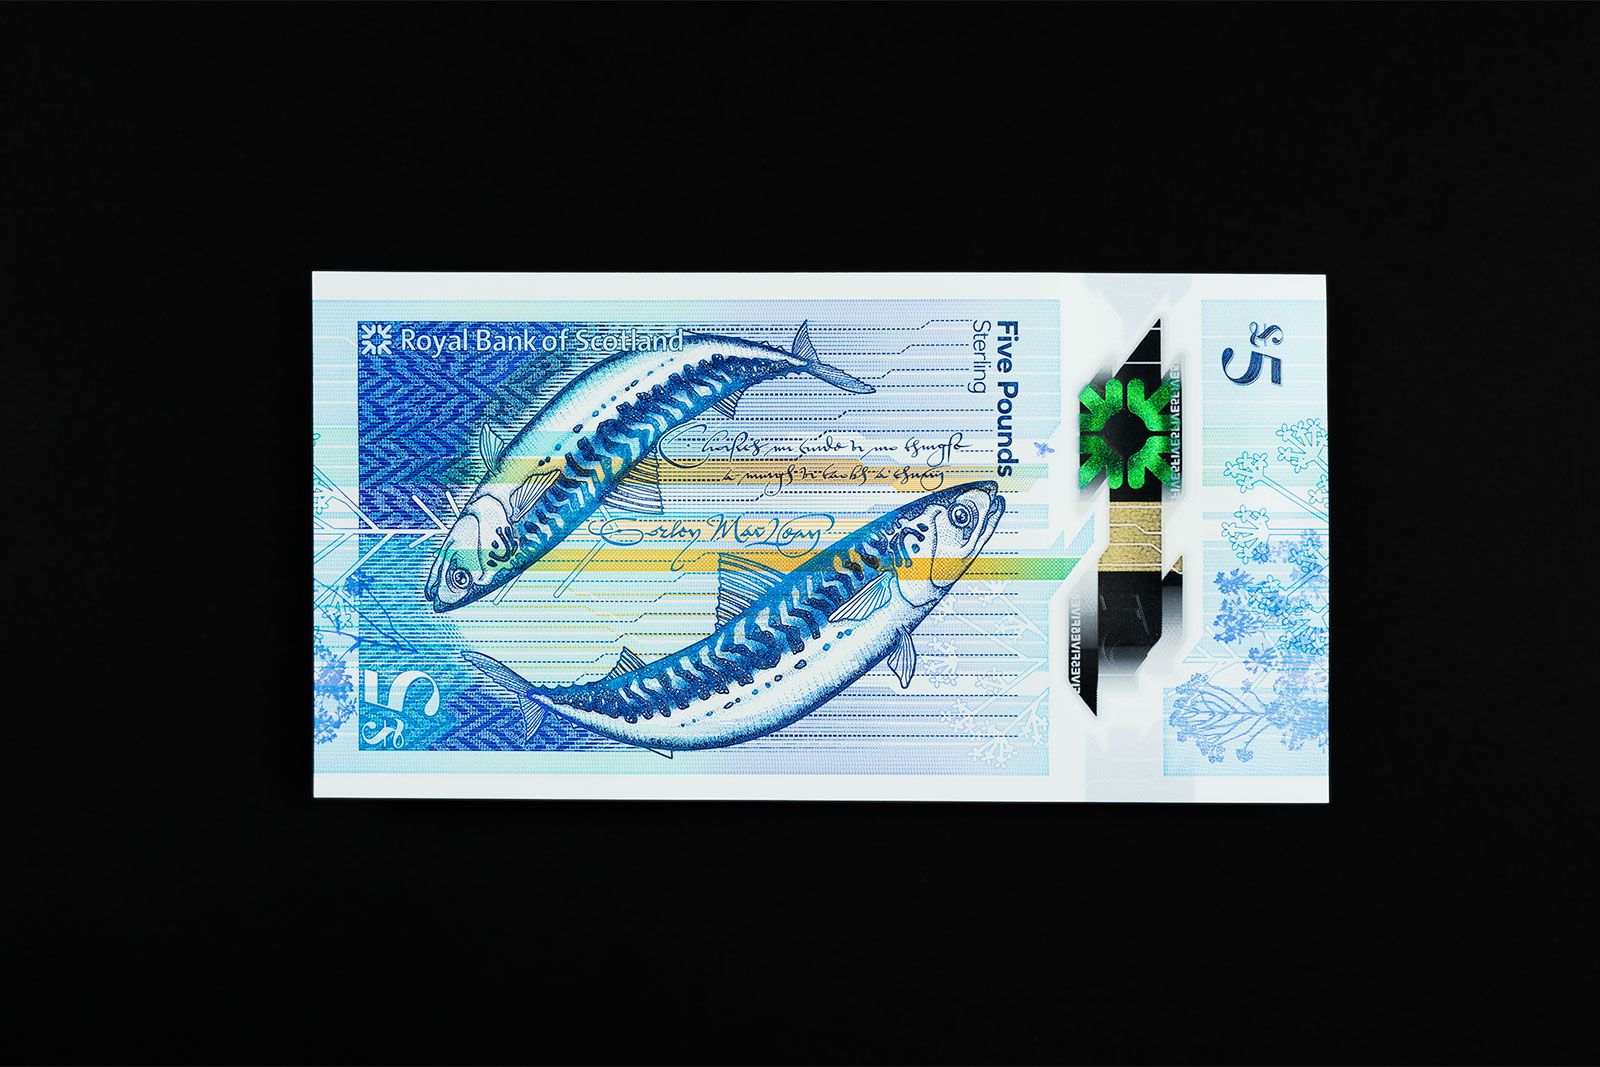 Royal Bank Of Scotland - The People's Money Banknotes £5 polymer banknote with mackerel design. O Street, Glasgow